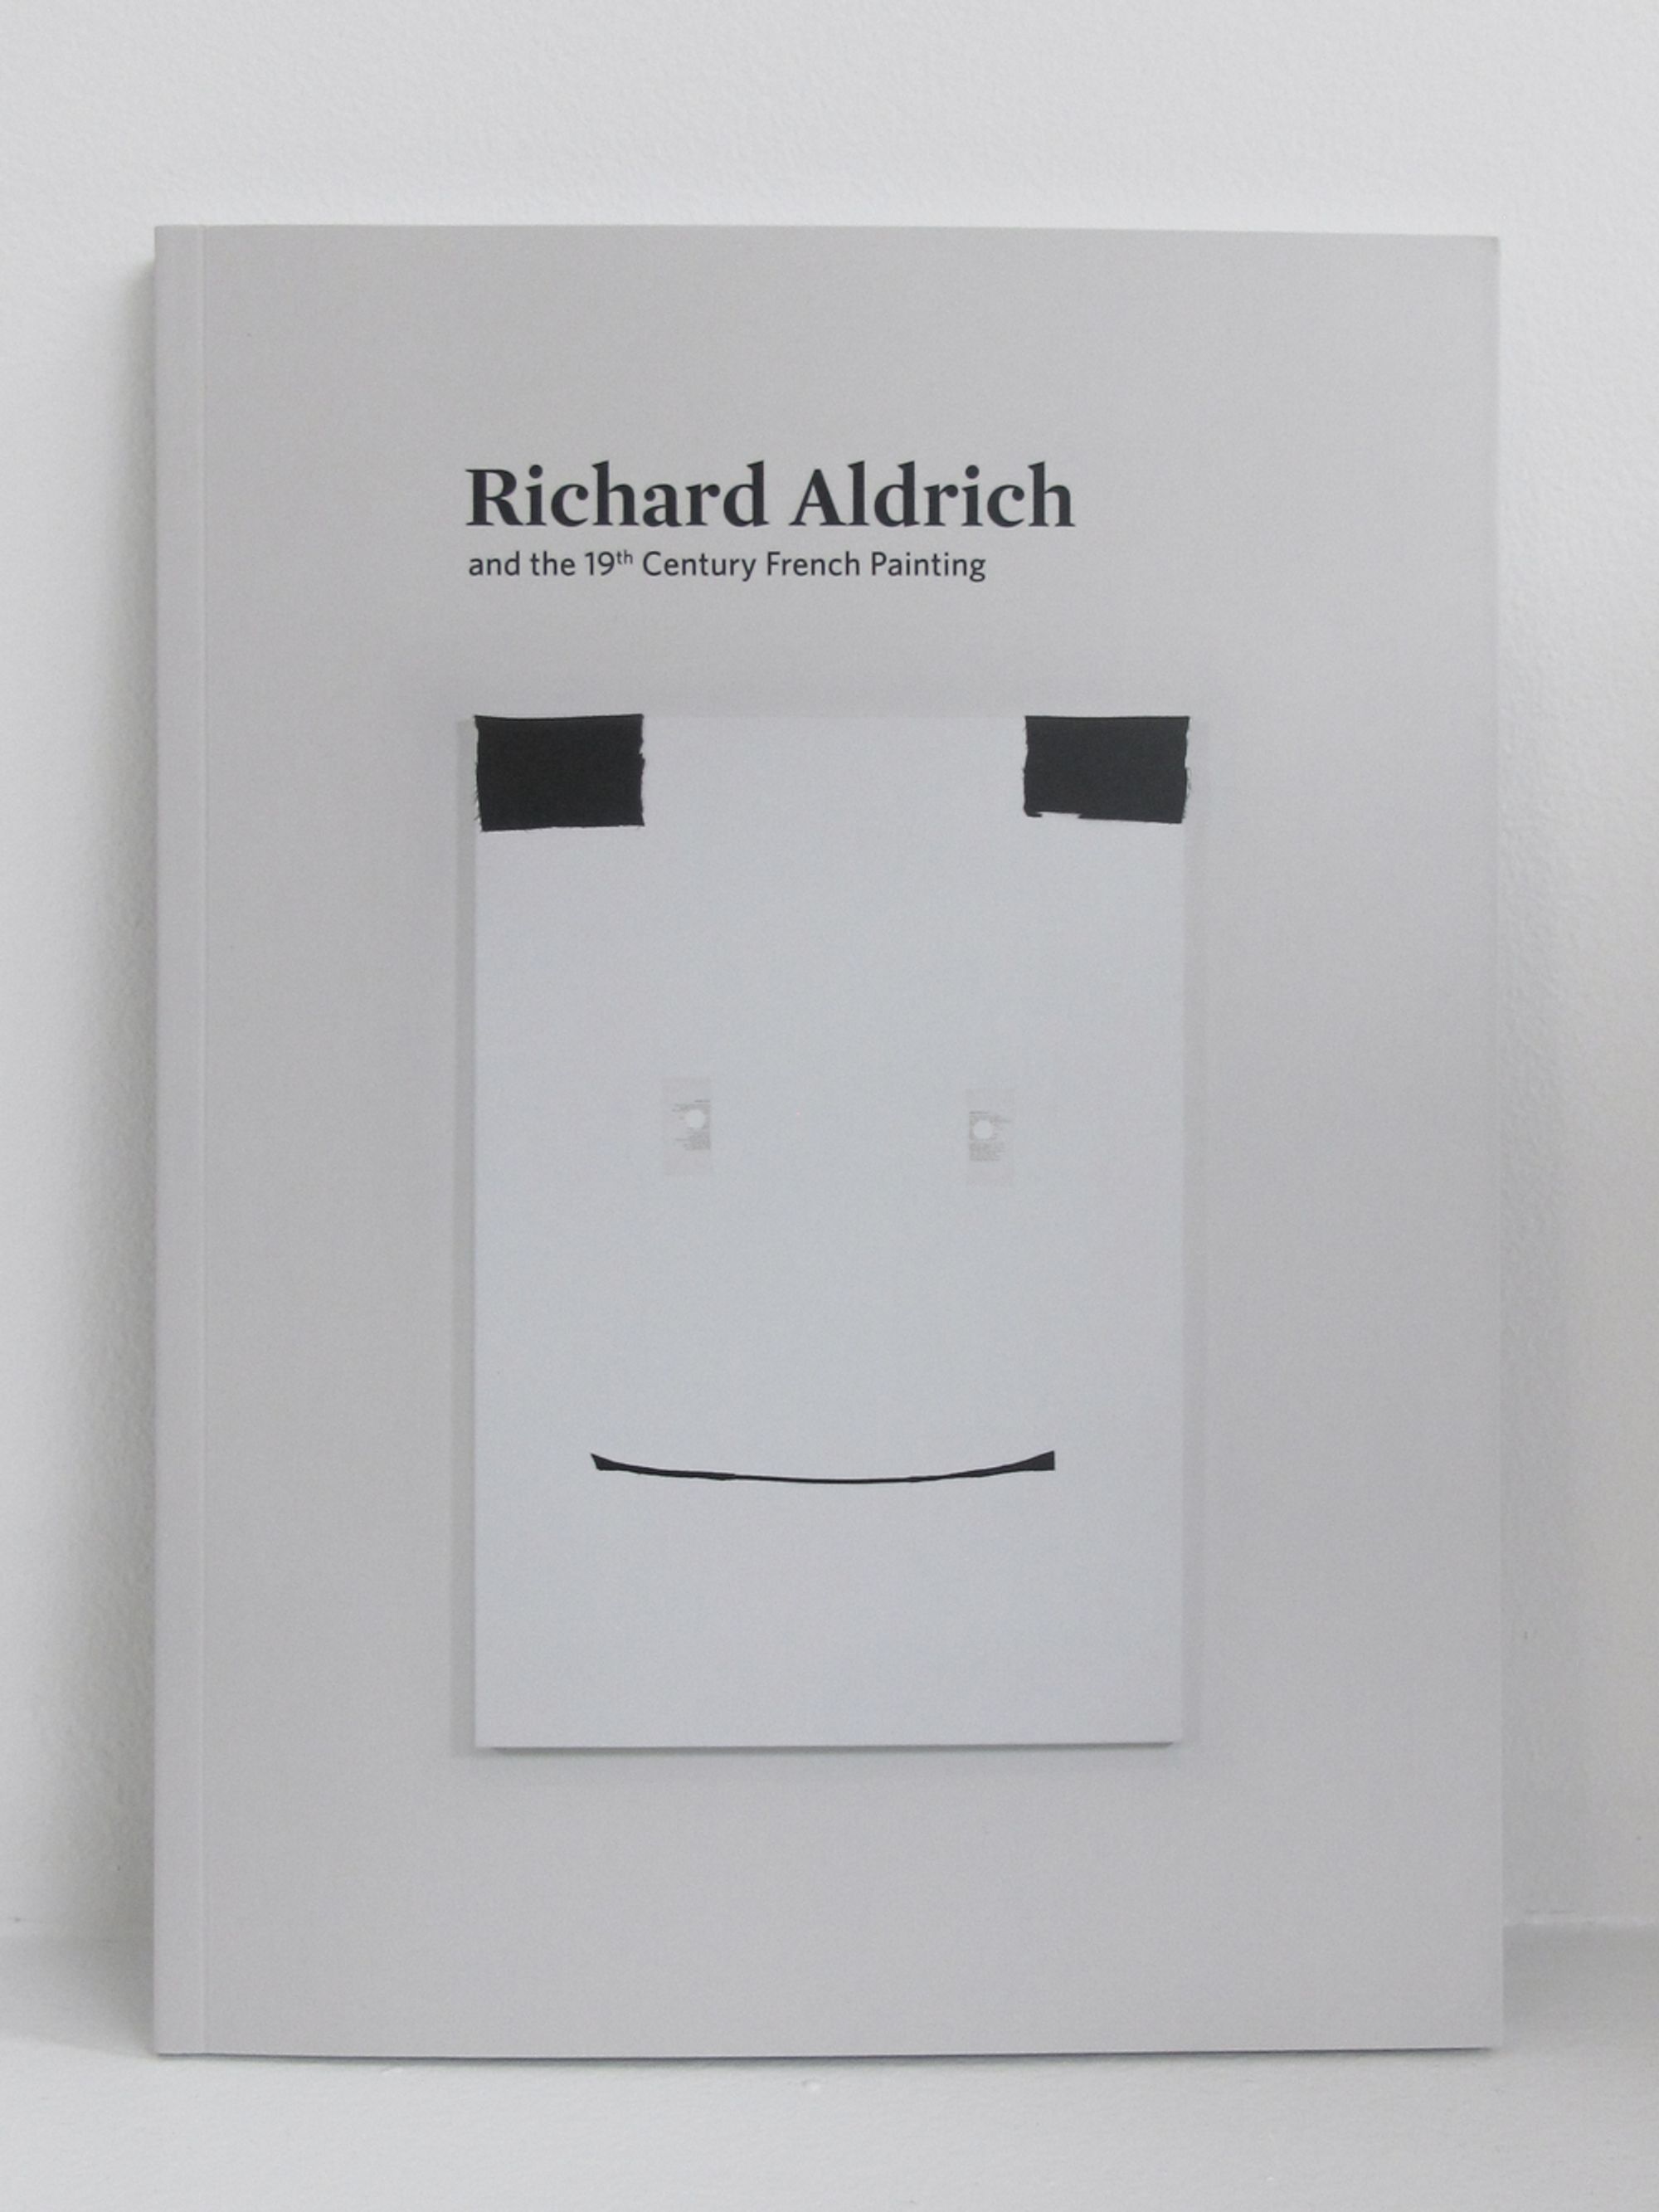 Book cover on plain background with title of Richard Aldrich and the 19th century French Painting